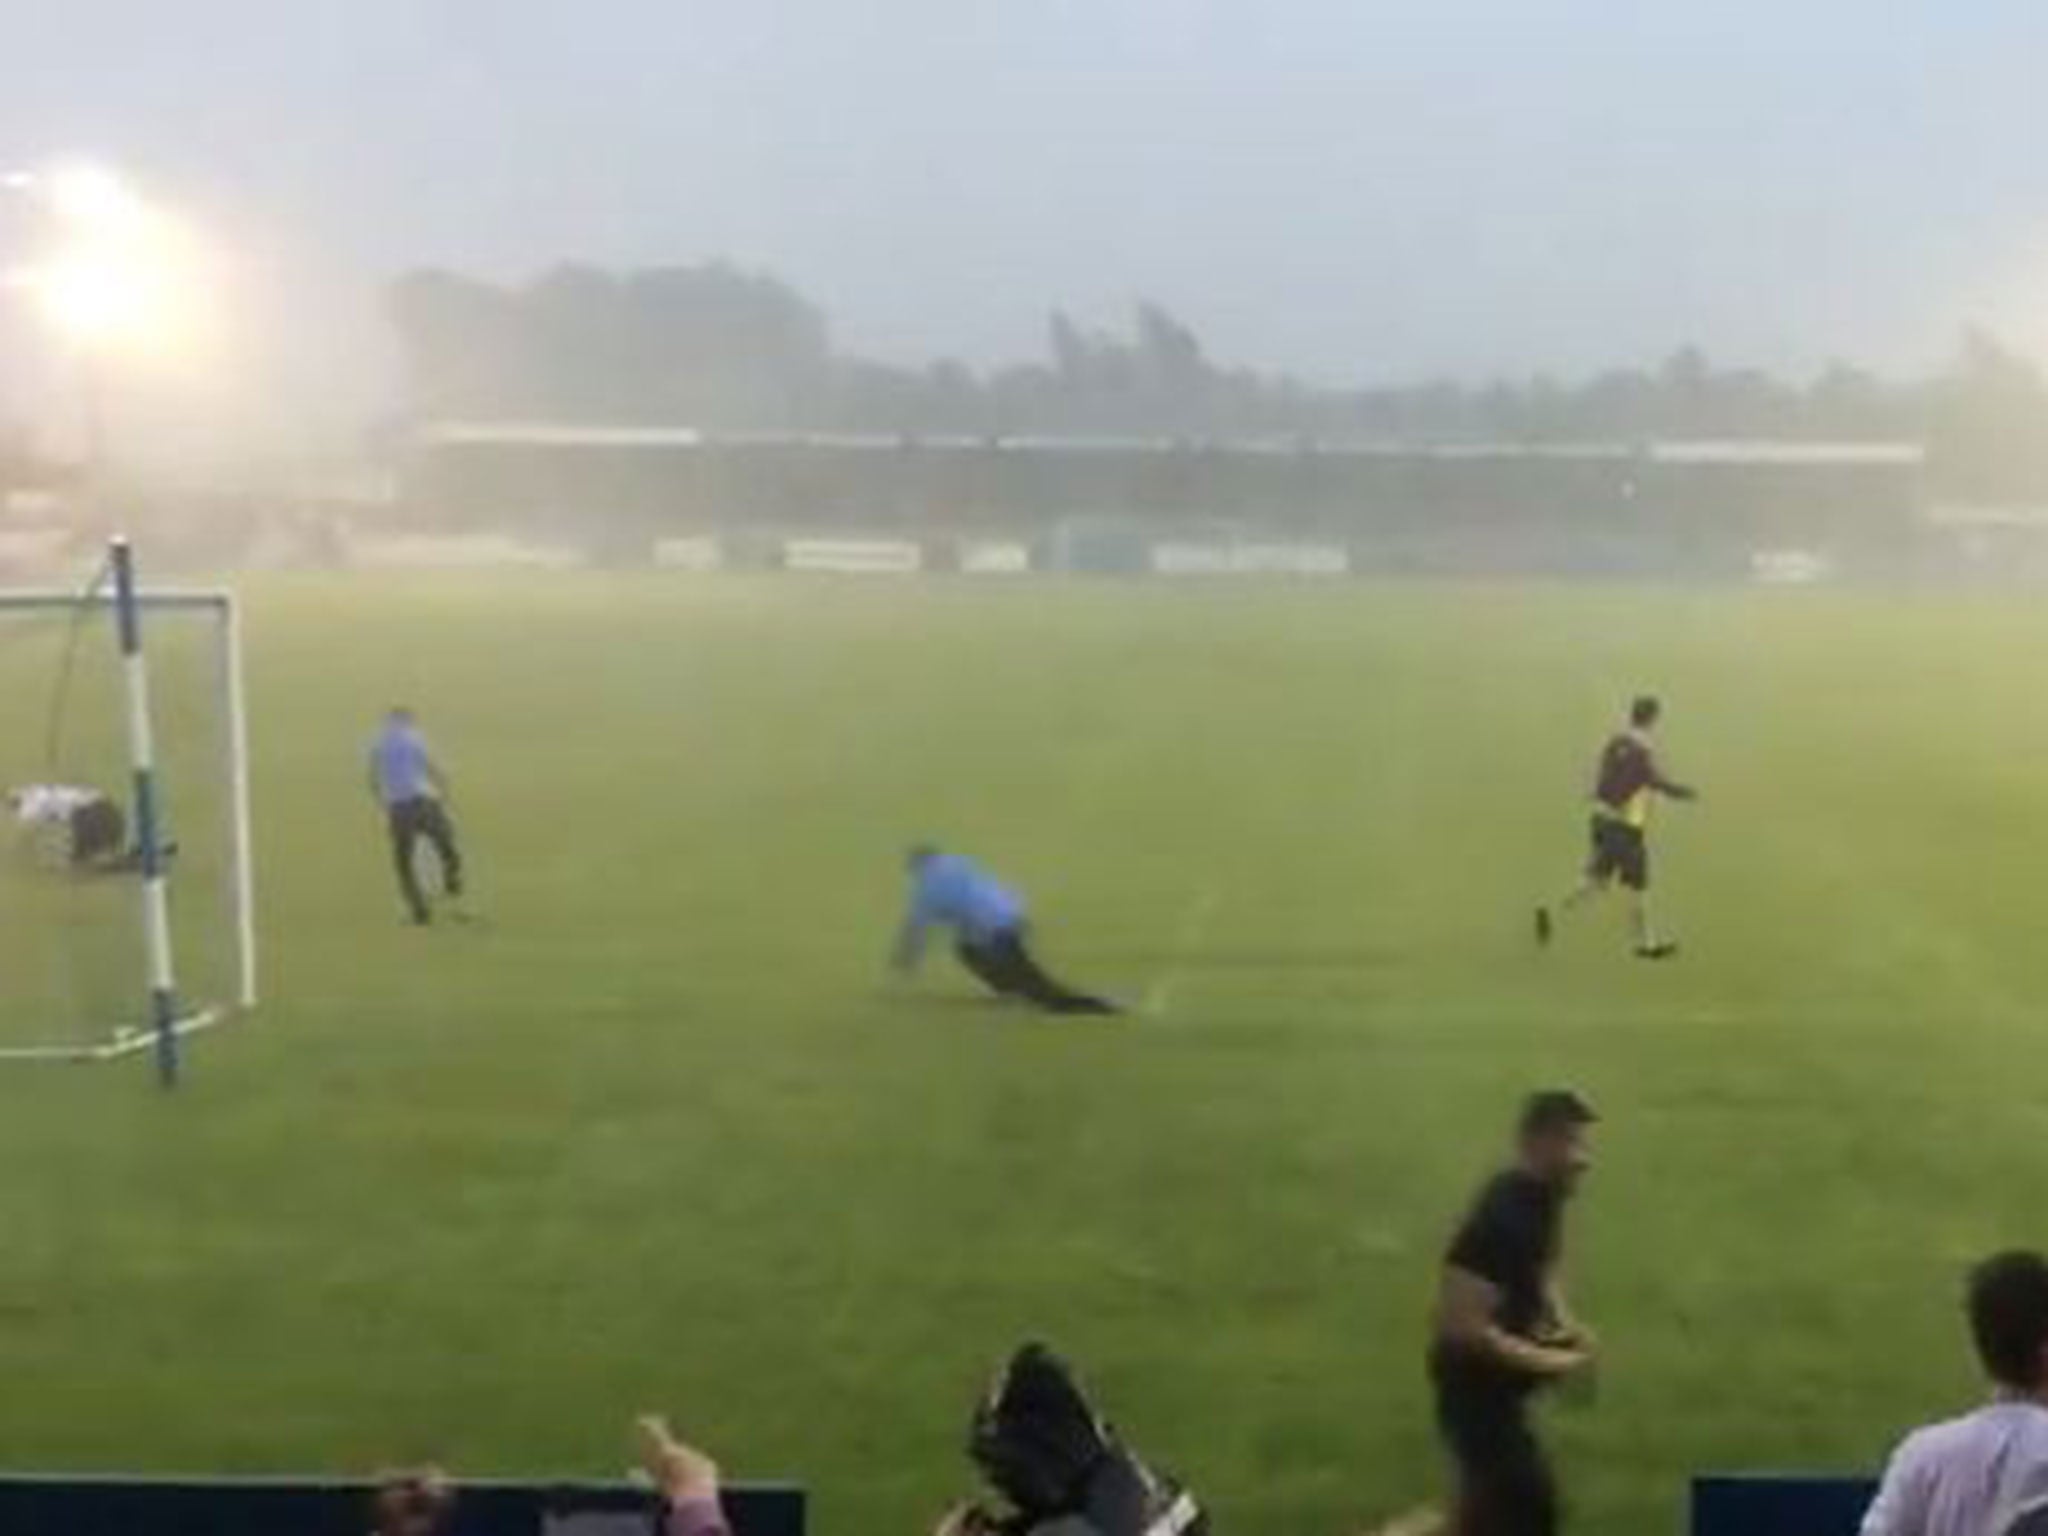 Coventry City fans do Klinsmann dives in during torrential rain after the match against Nuneaton Town was abandoned